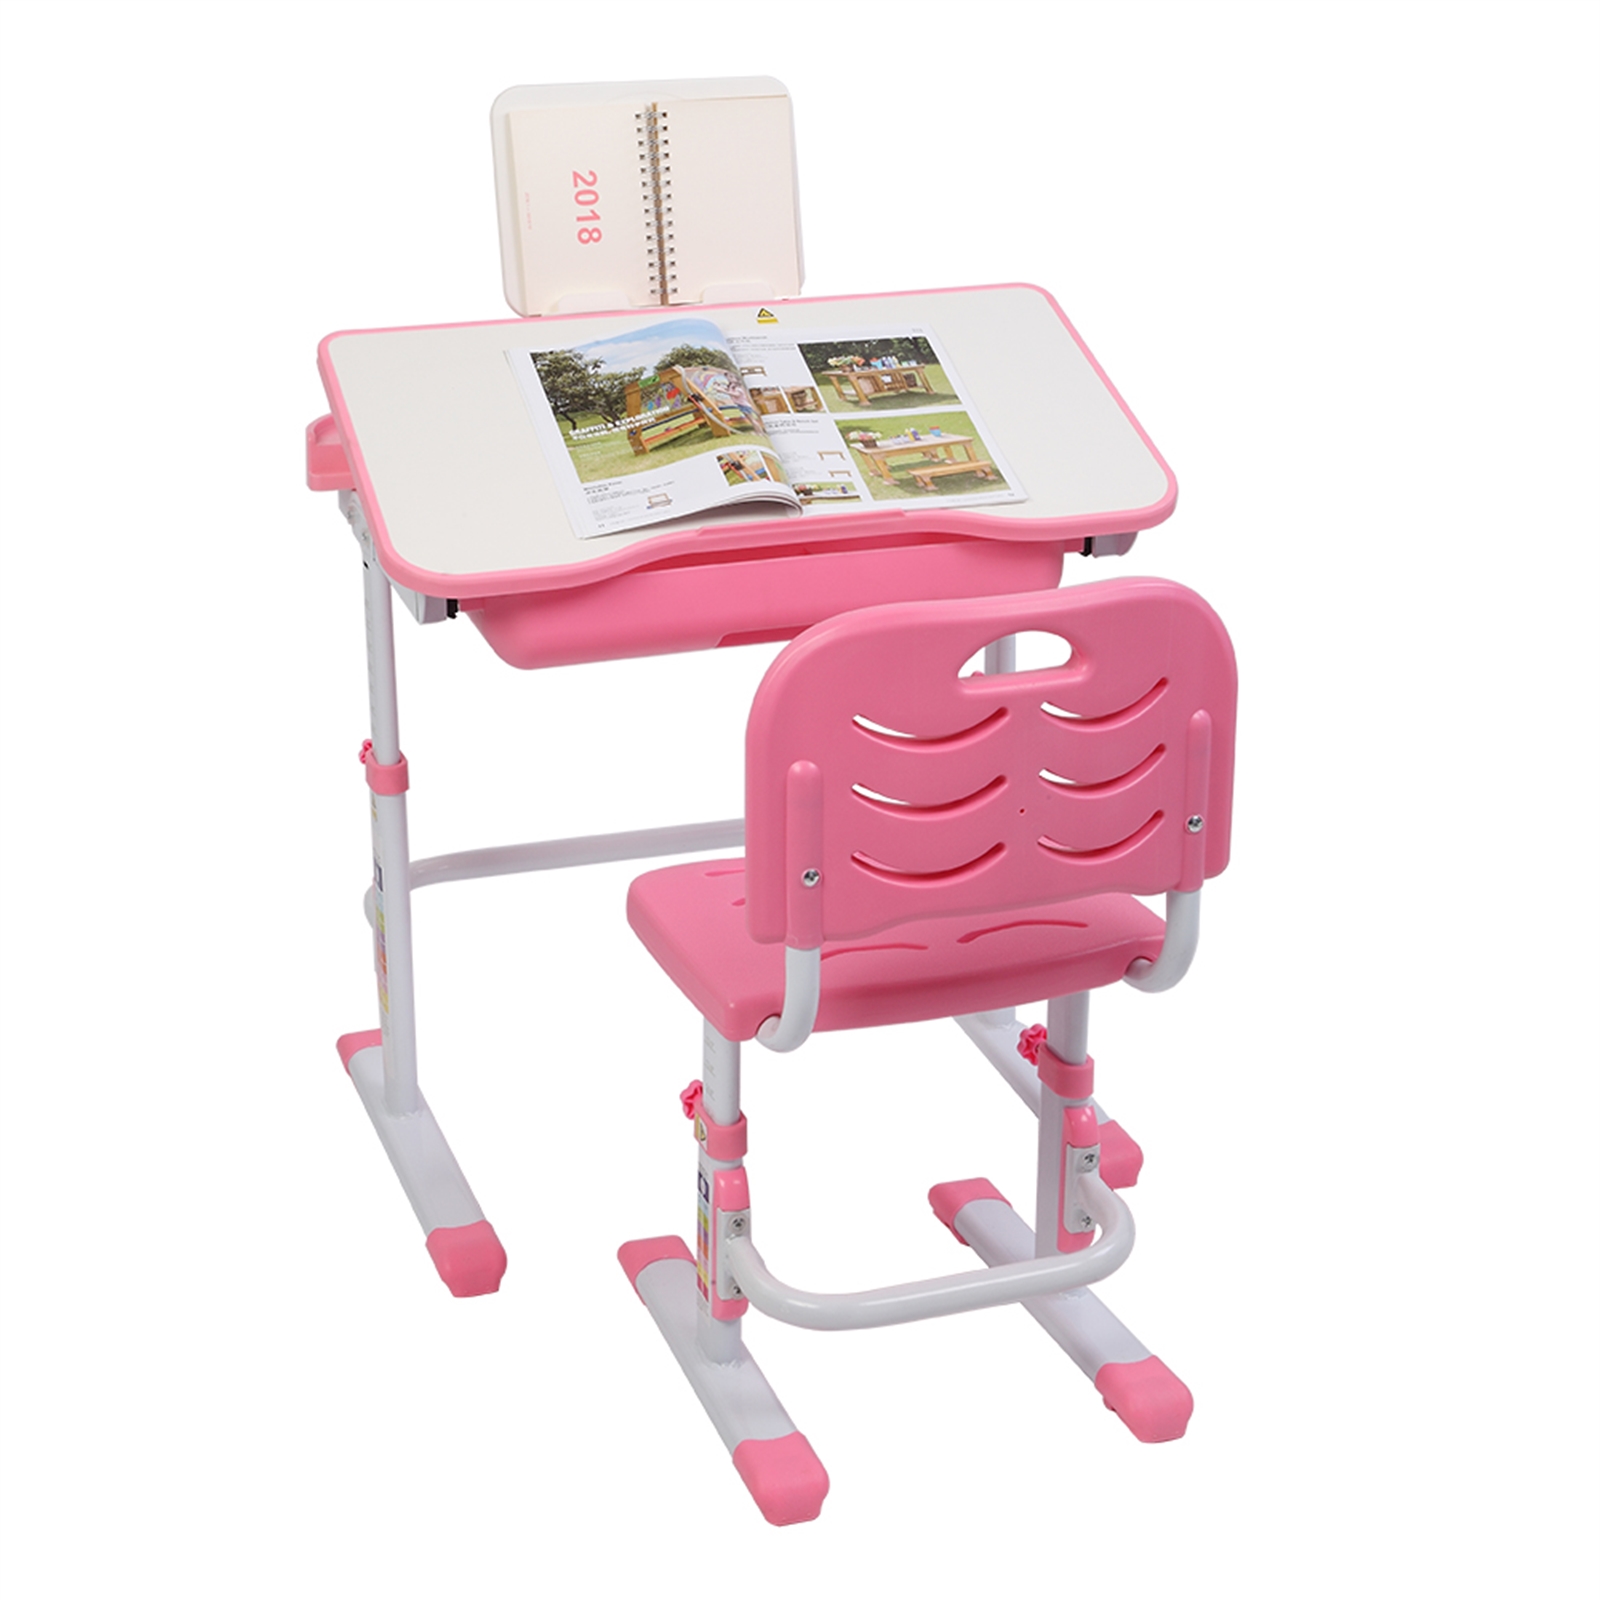 70CM Lifting Table Can Tilt Children Learning Table And Chair Pink (With Reading Stand Without Table